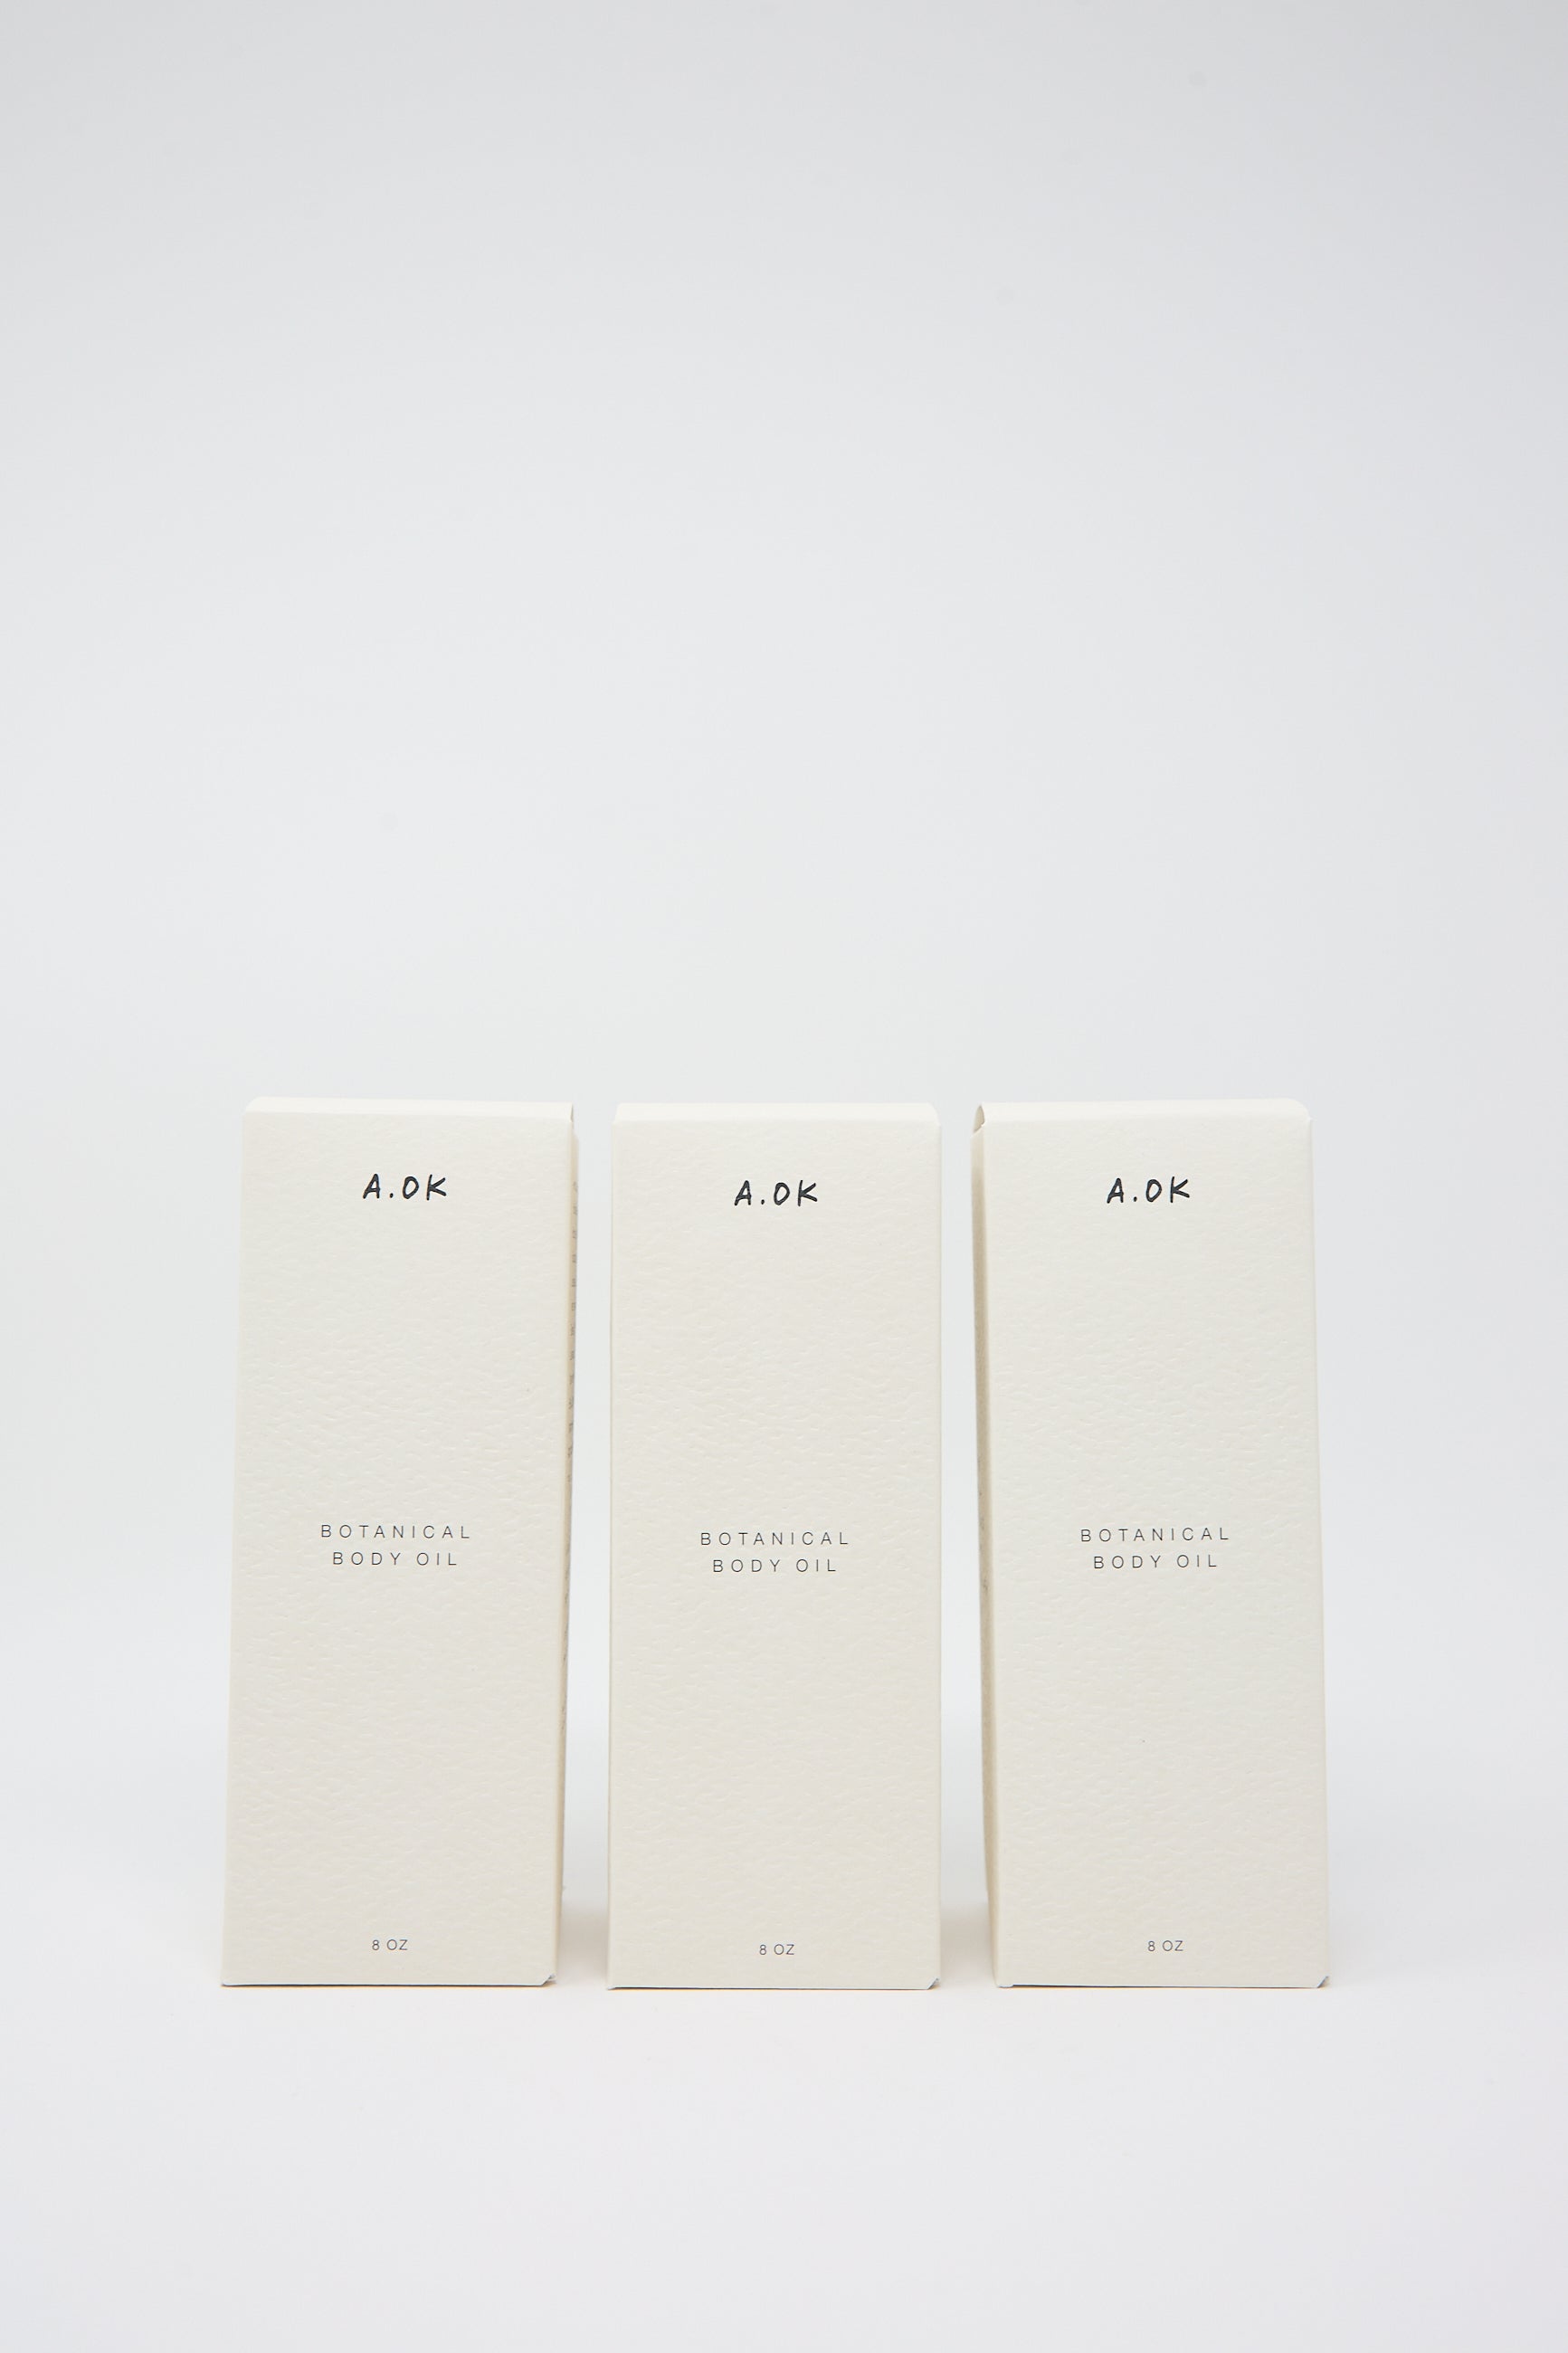 Three identical off-white boxes of Botanical Body Oil are arranged in a row against a plain white backdrop. The packaging features minimalist design and the text "A.OK Botanical Body Oil." This luxurious blend harnesses the power of natural oils, offering a refined unisex aroma.